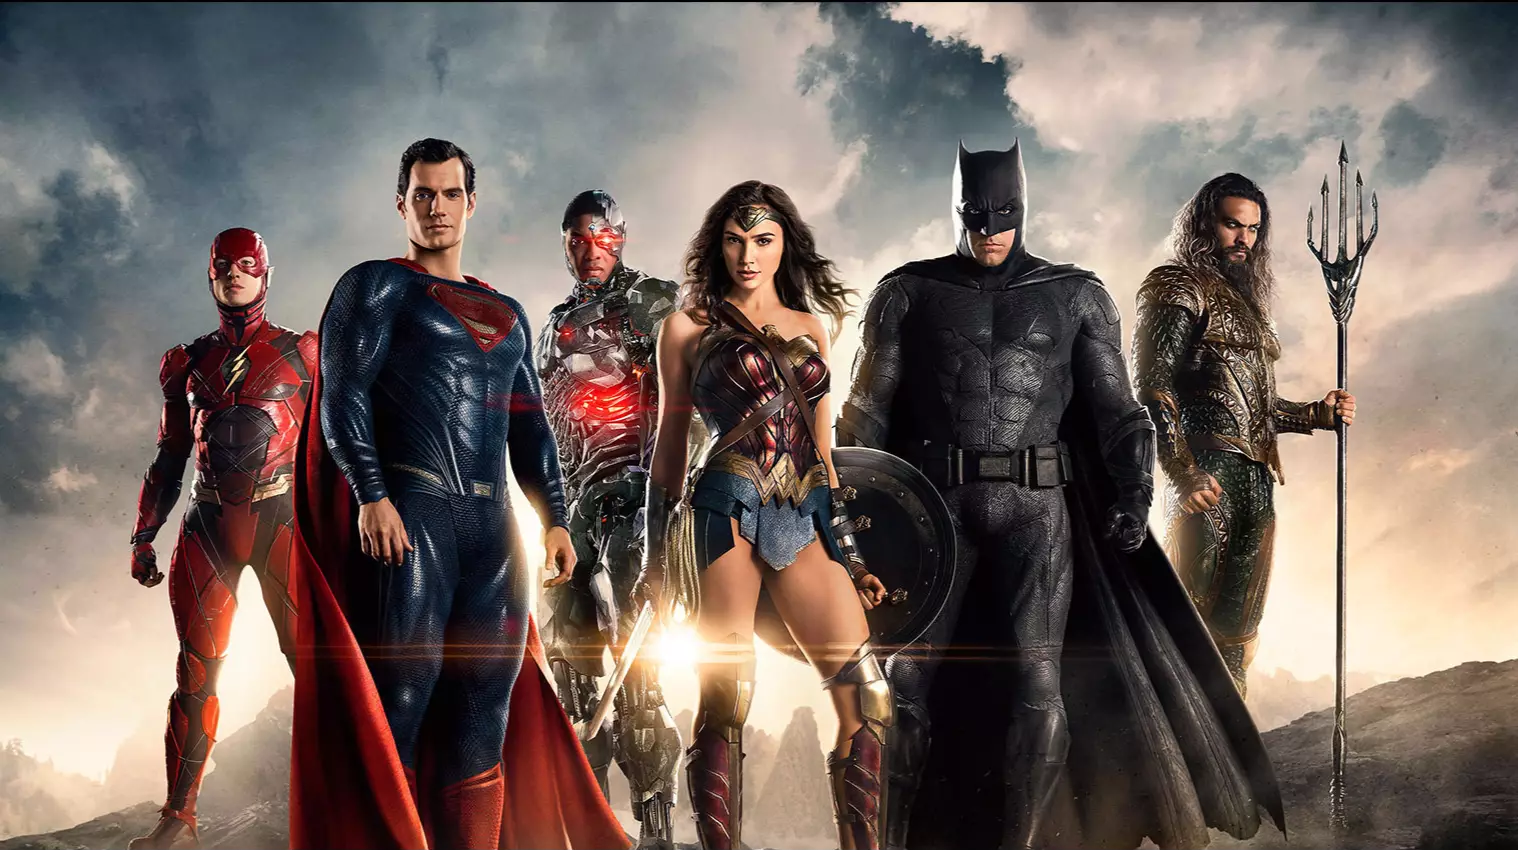 'Justice League' Extended Trailer Drops, And Batman Has Made Some Friends